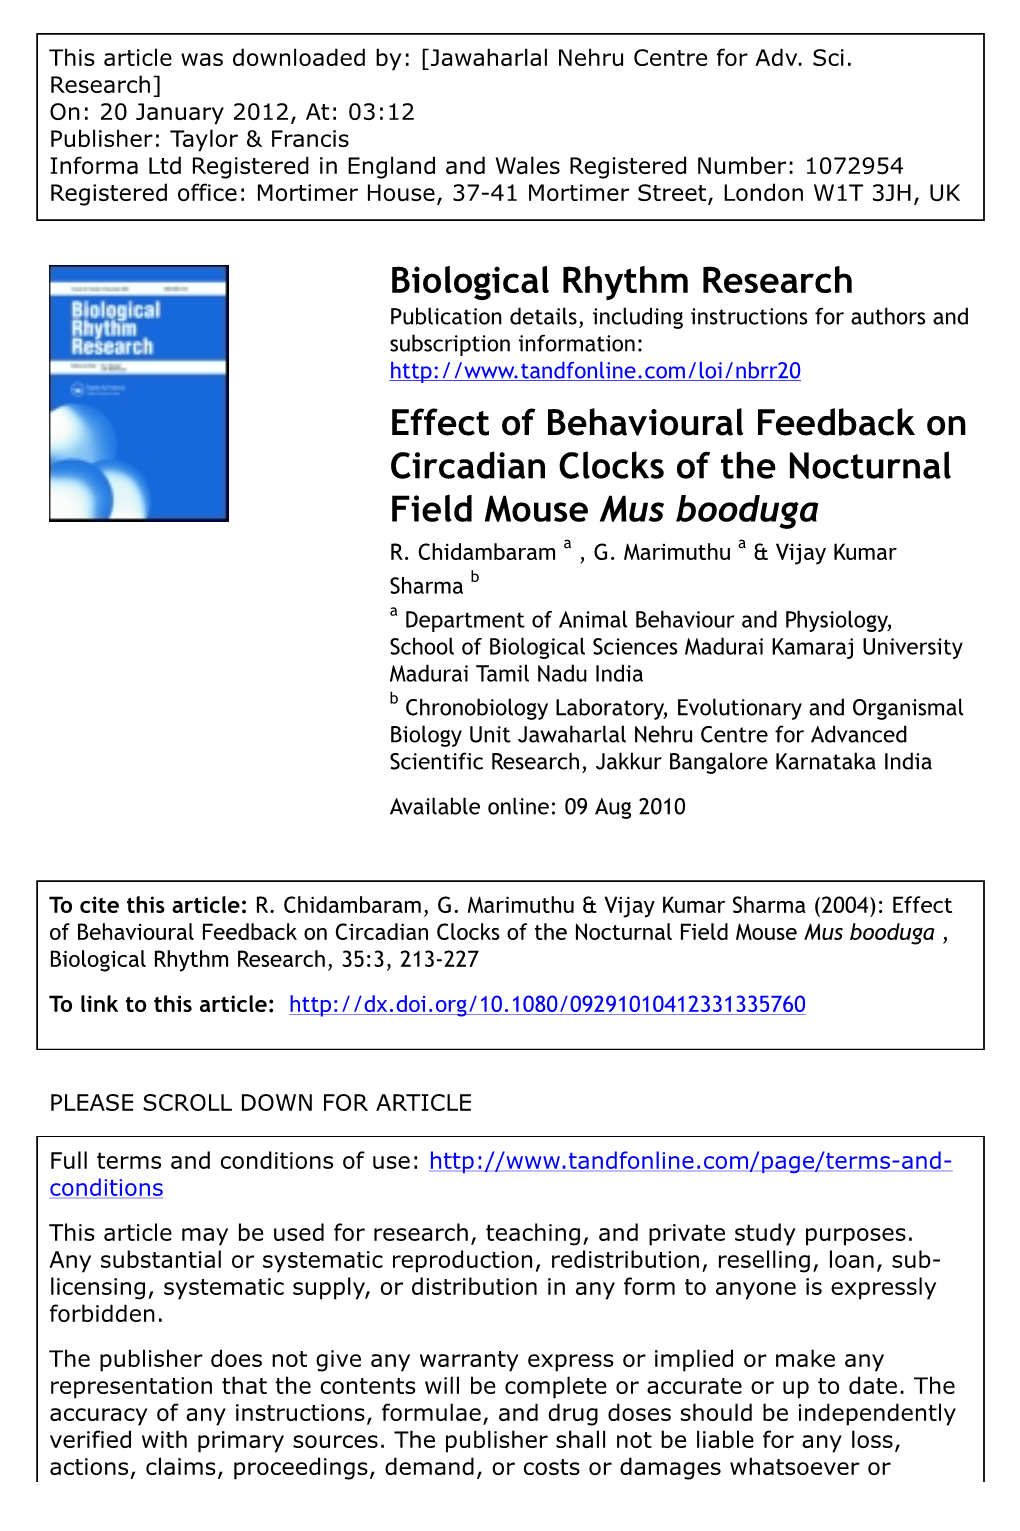 Effect of Behavioural Feedback on Circadian Clocks of the Nocturnal Field Mouse Mus Booduga R